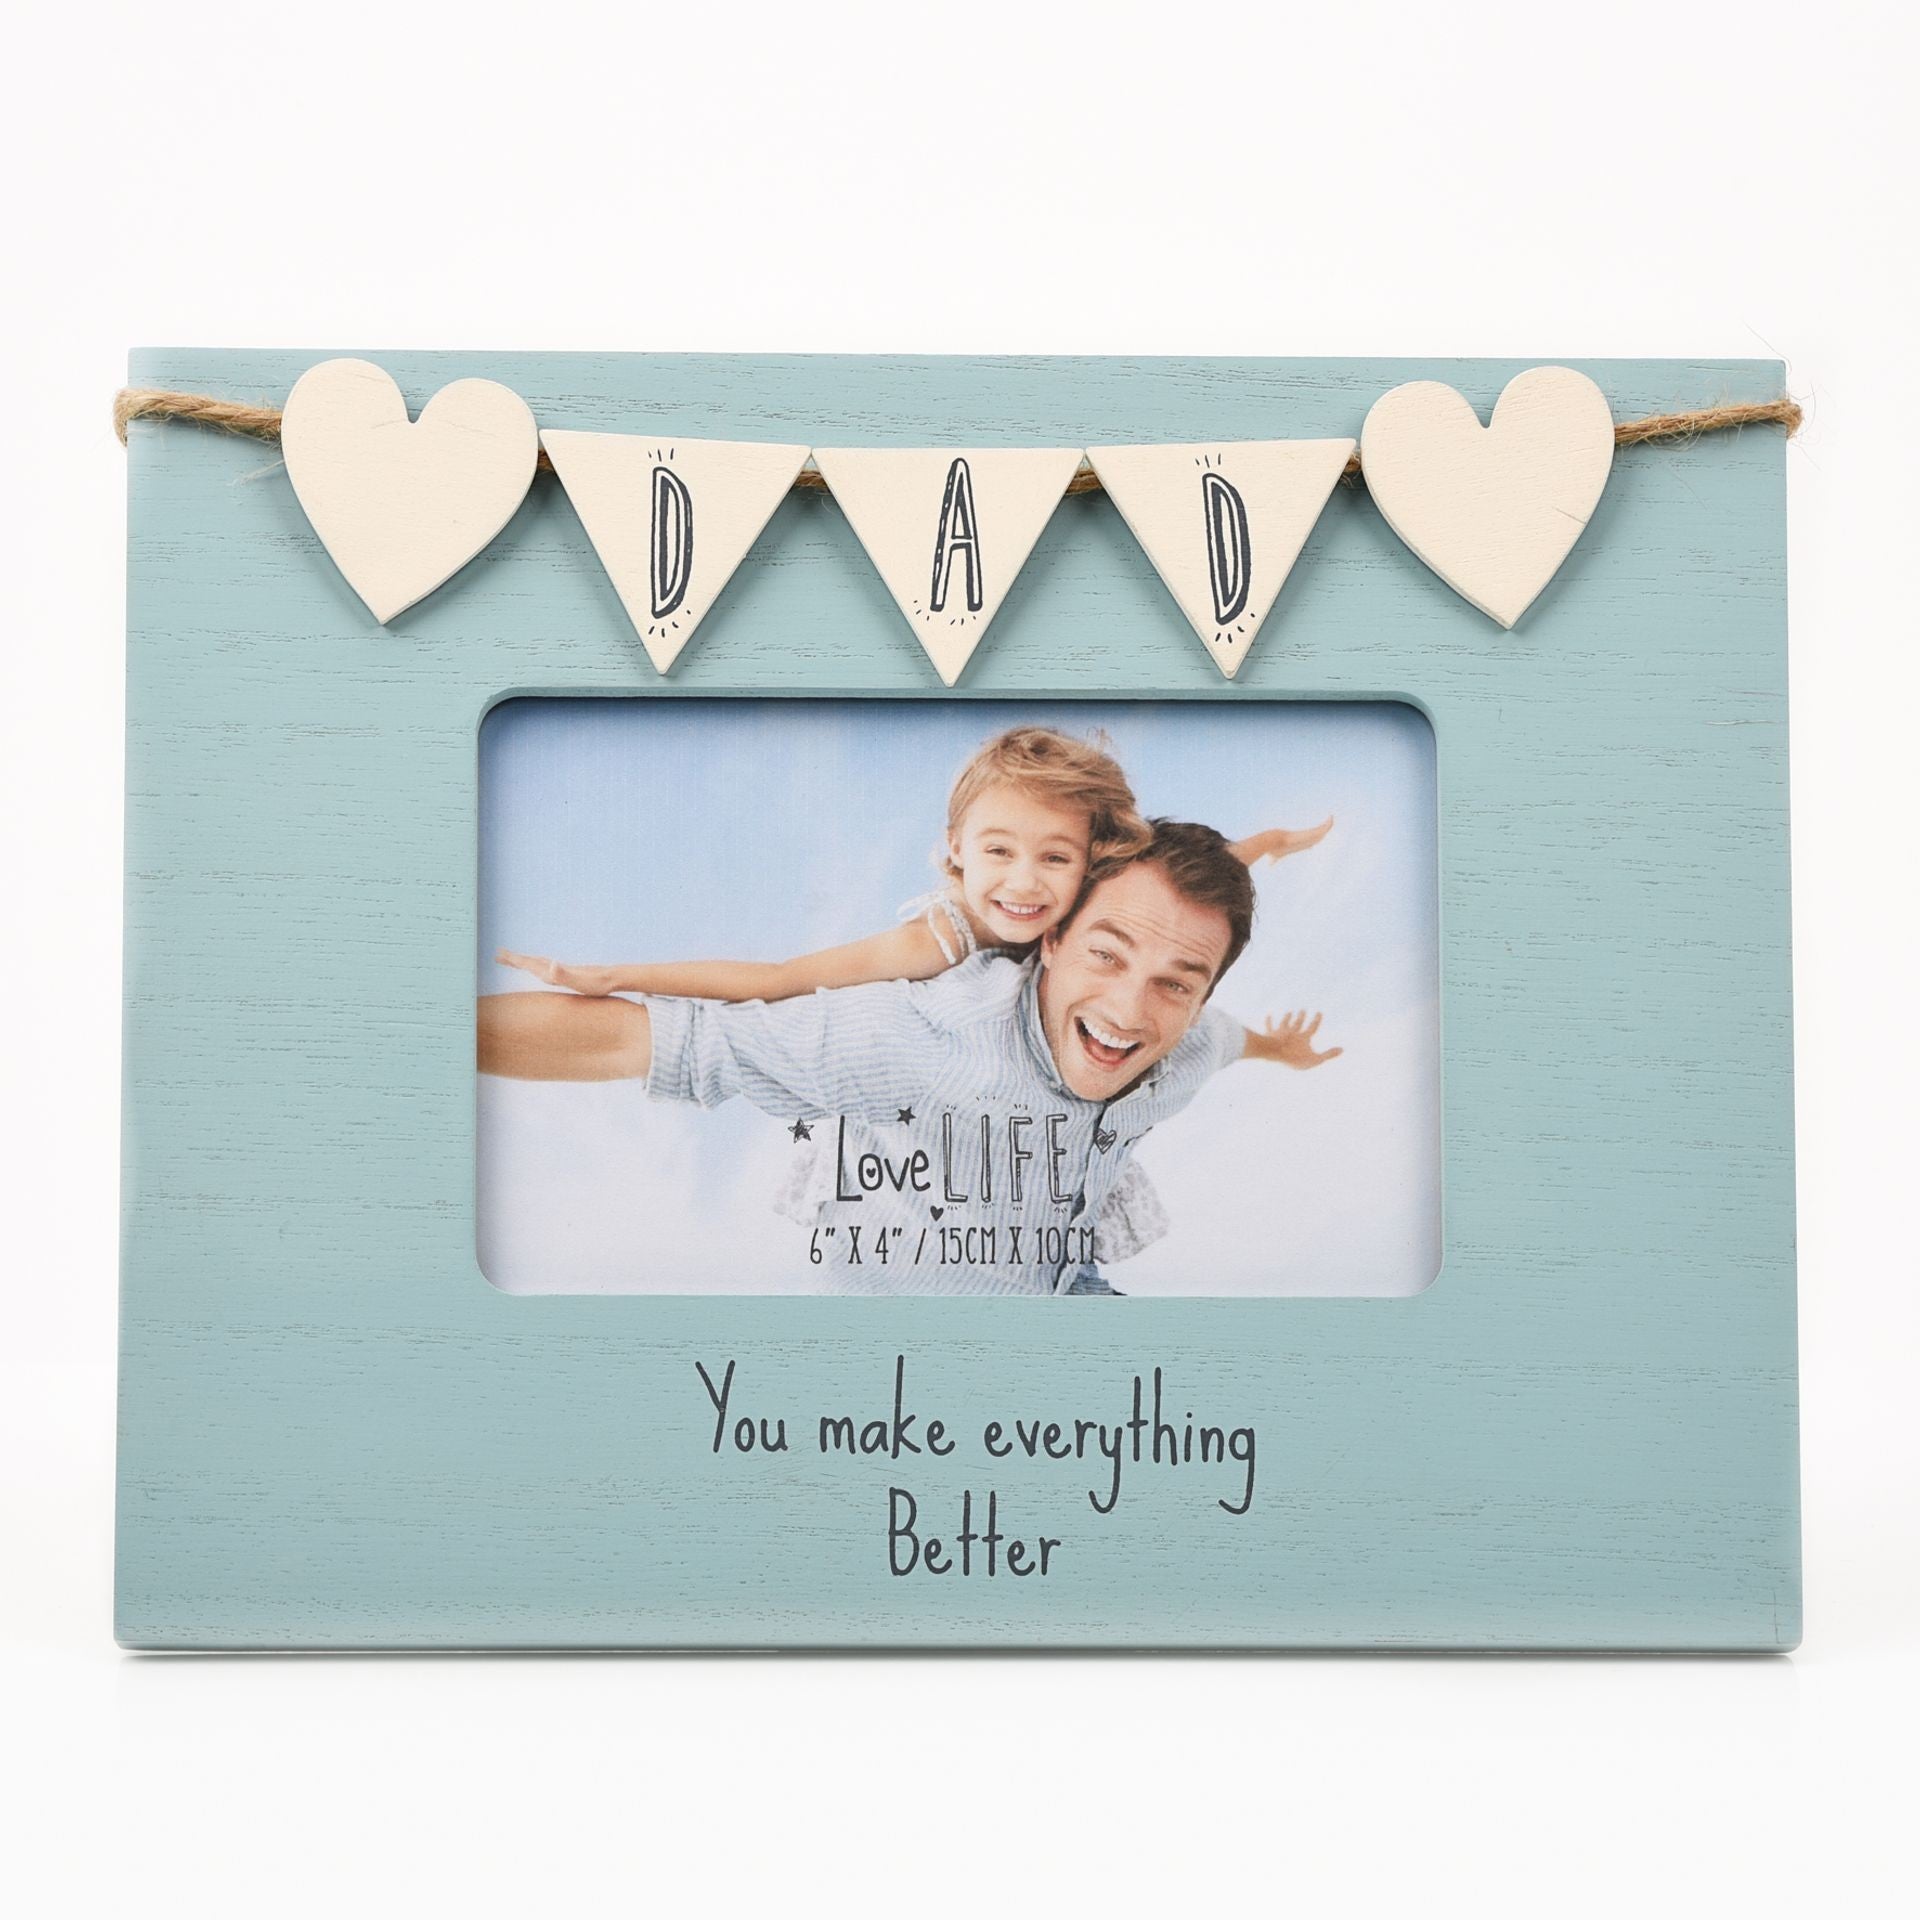 View Dad Photo Frame with bunting information